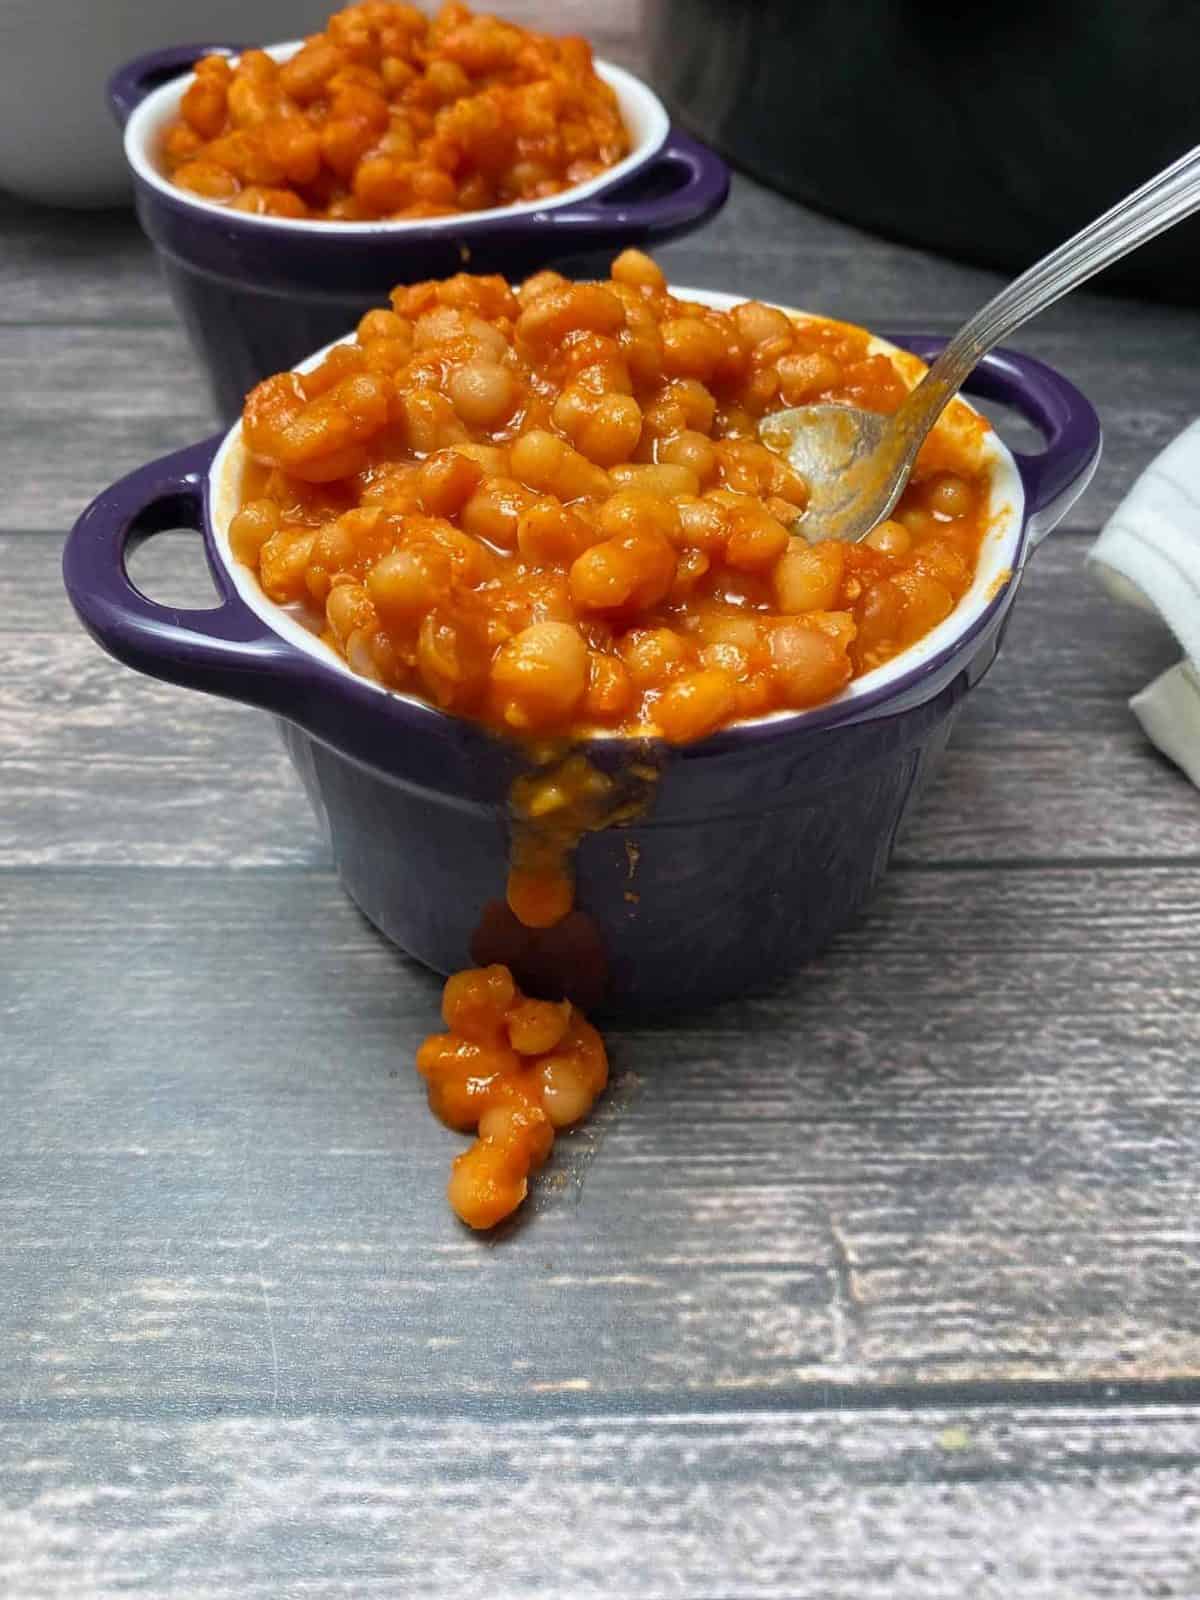 cooked beans in sauce spilling over the side of purple bowl